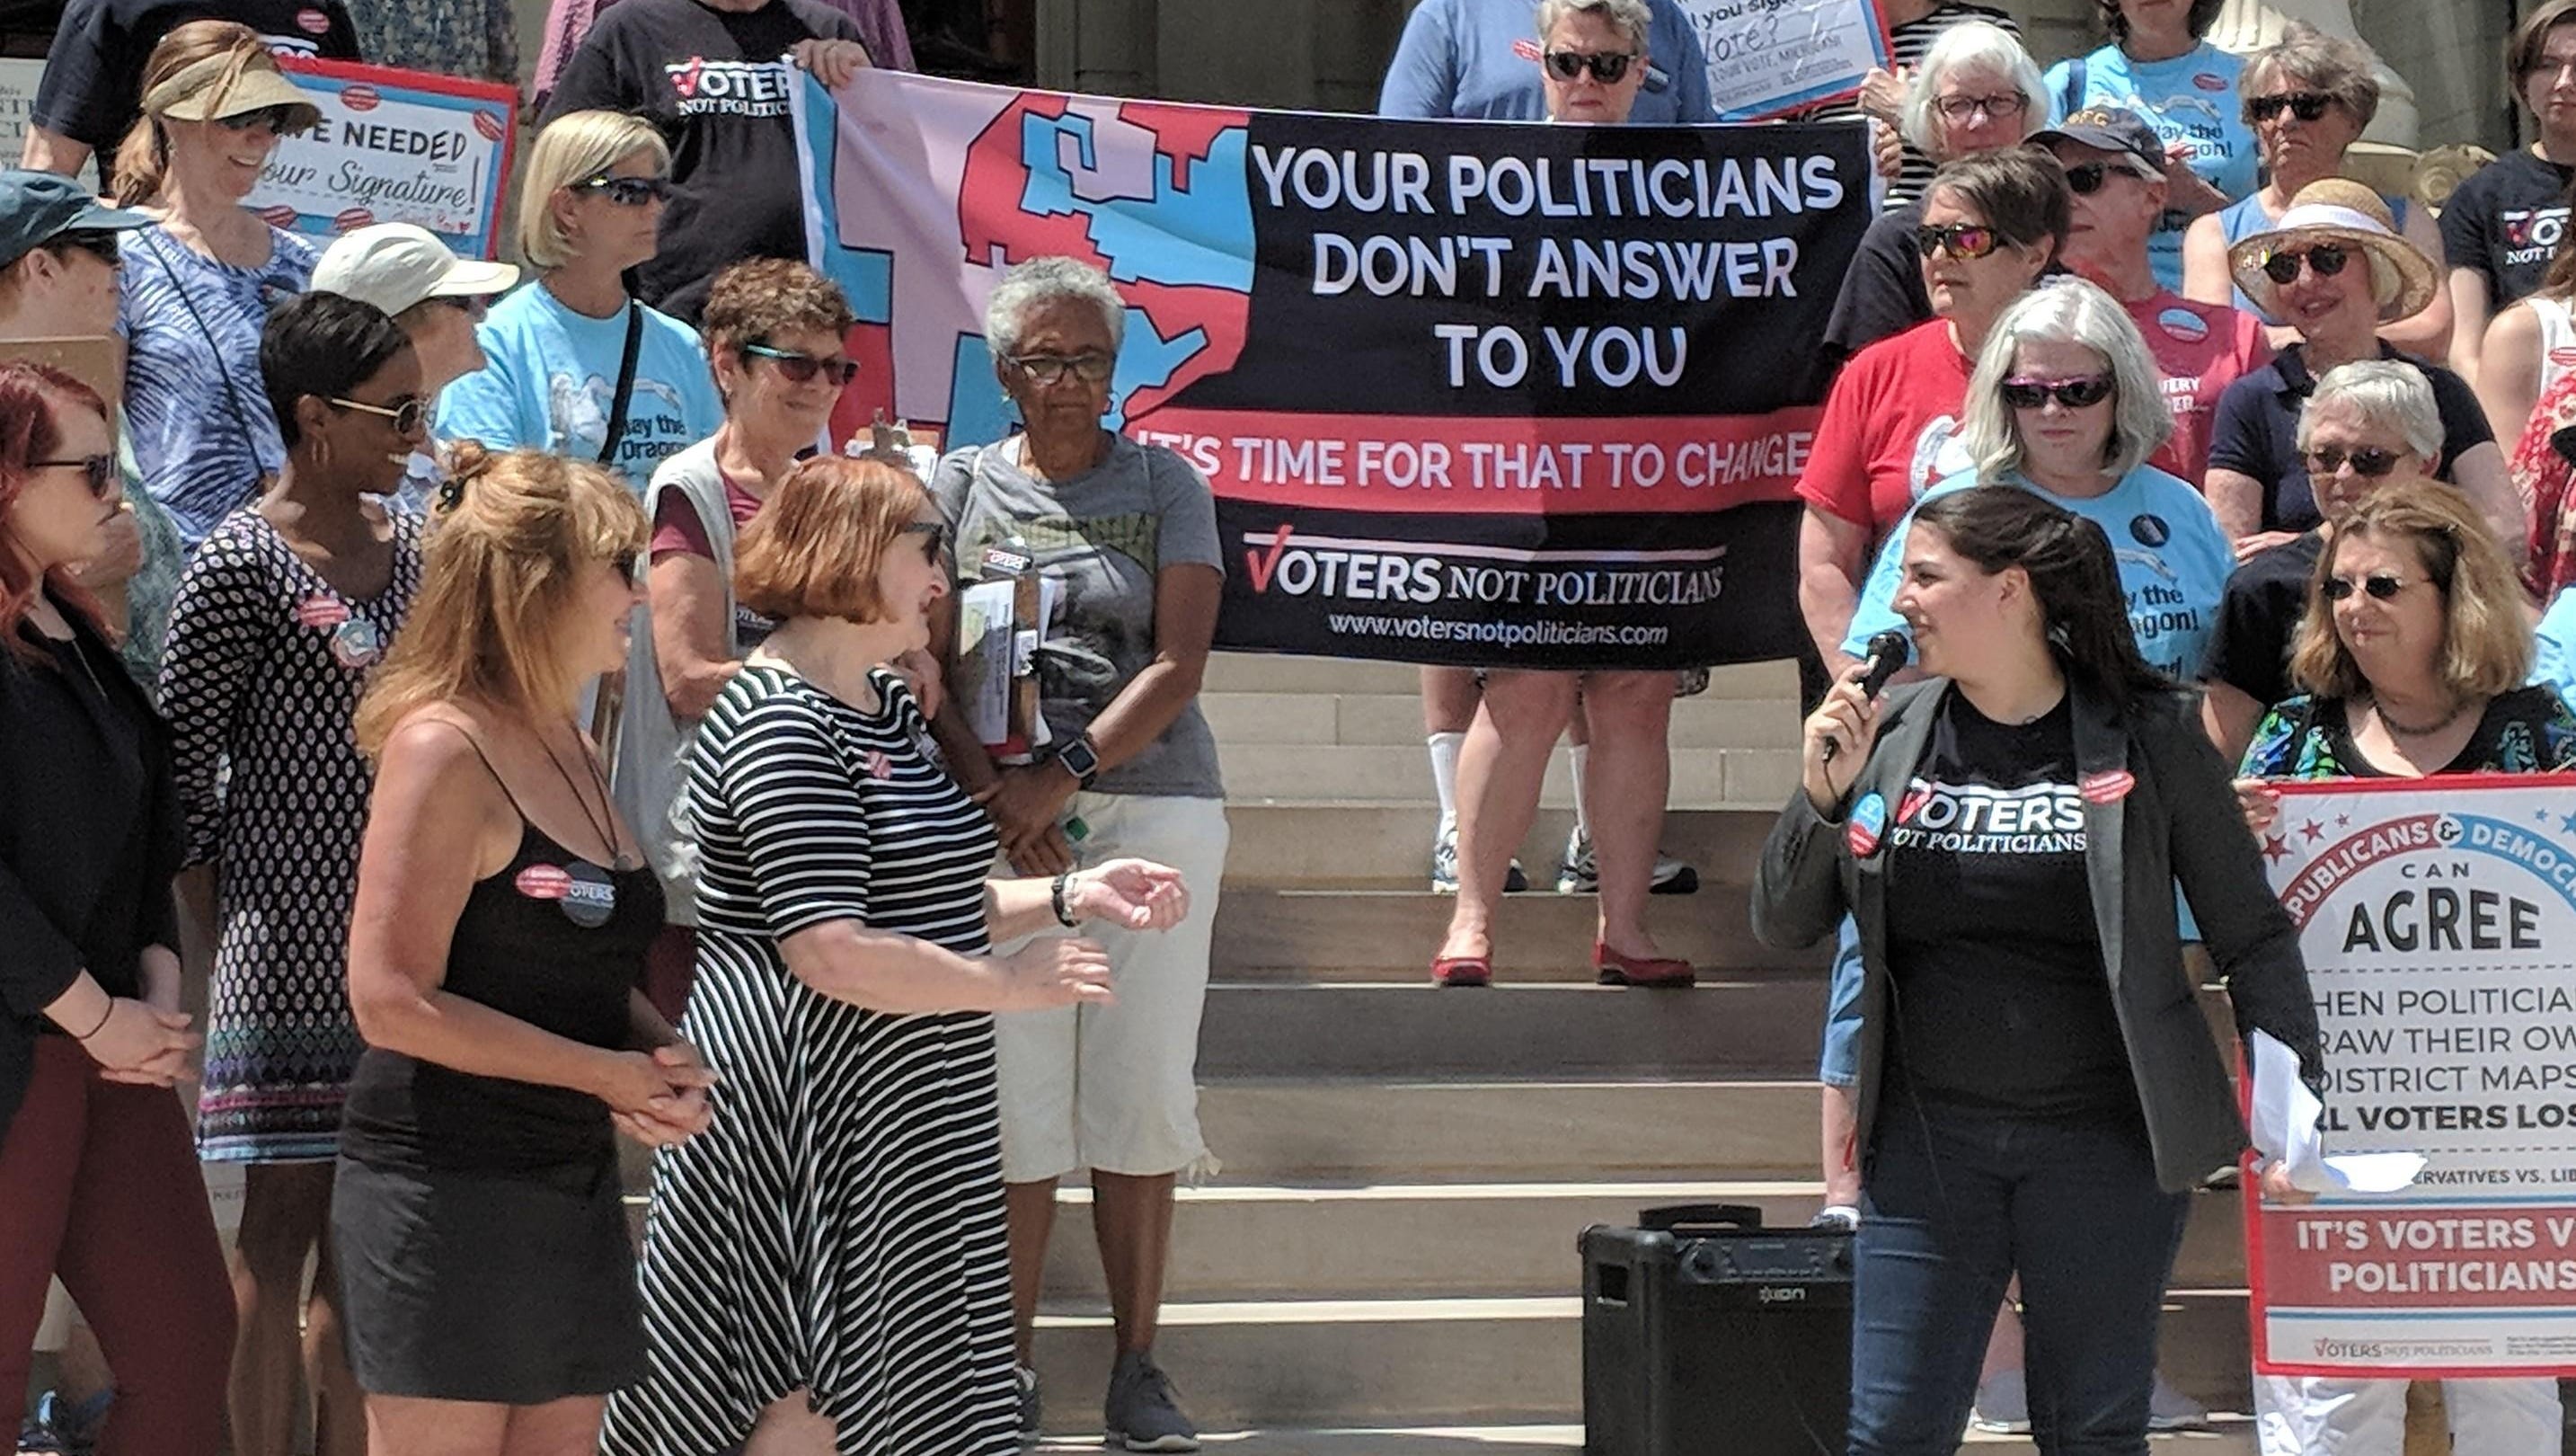 Katie Fahey of Voters Not Politicians speaks to supporters at the Michigan Capitol on May 24, 2018.